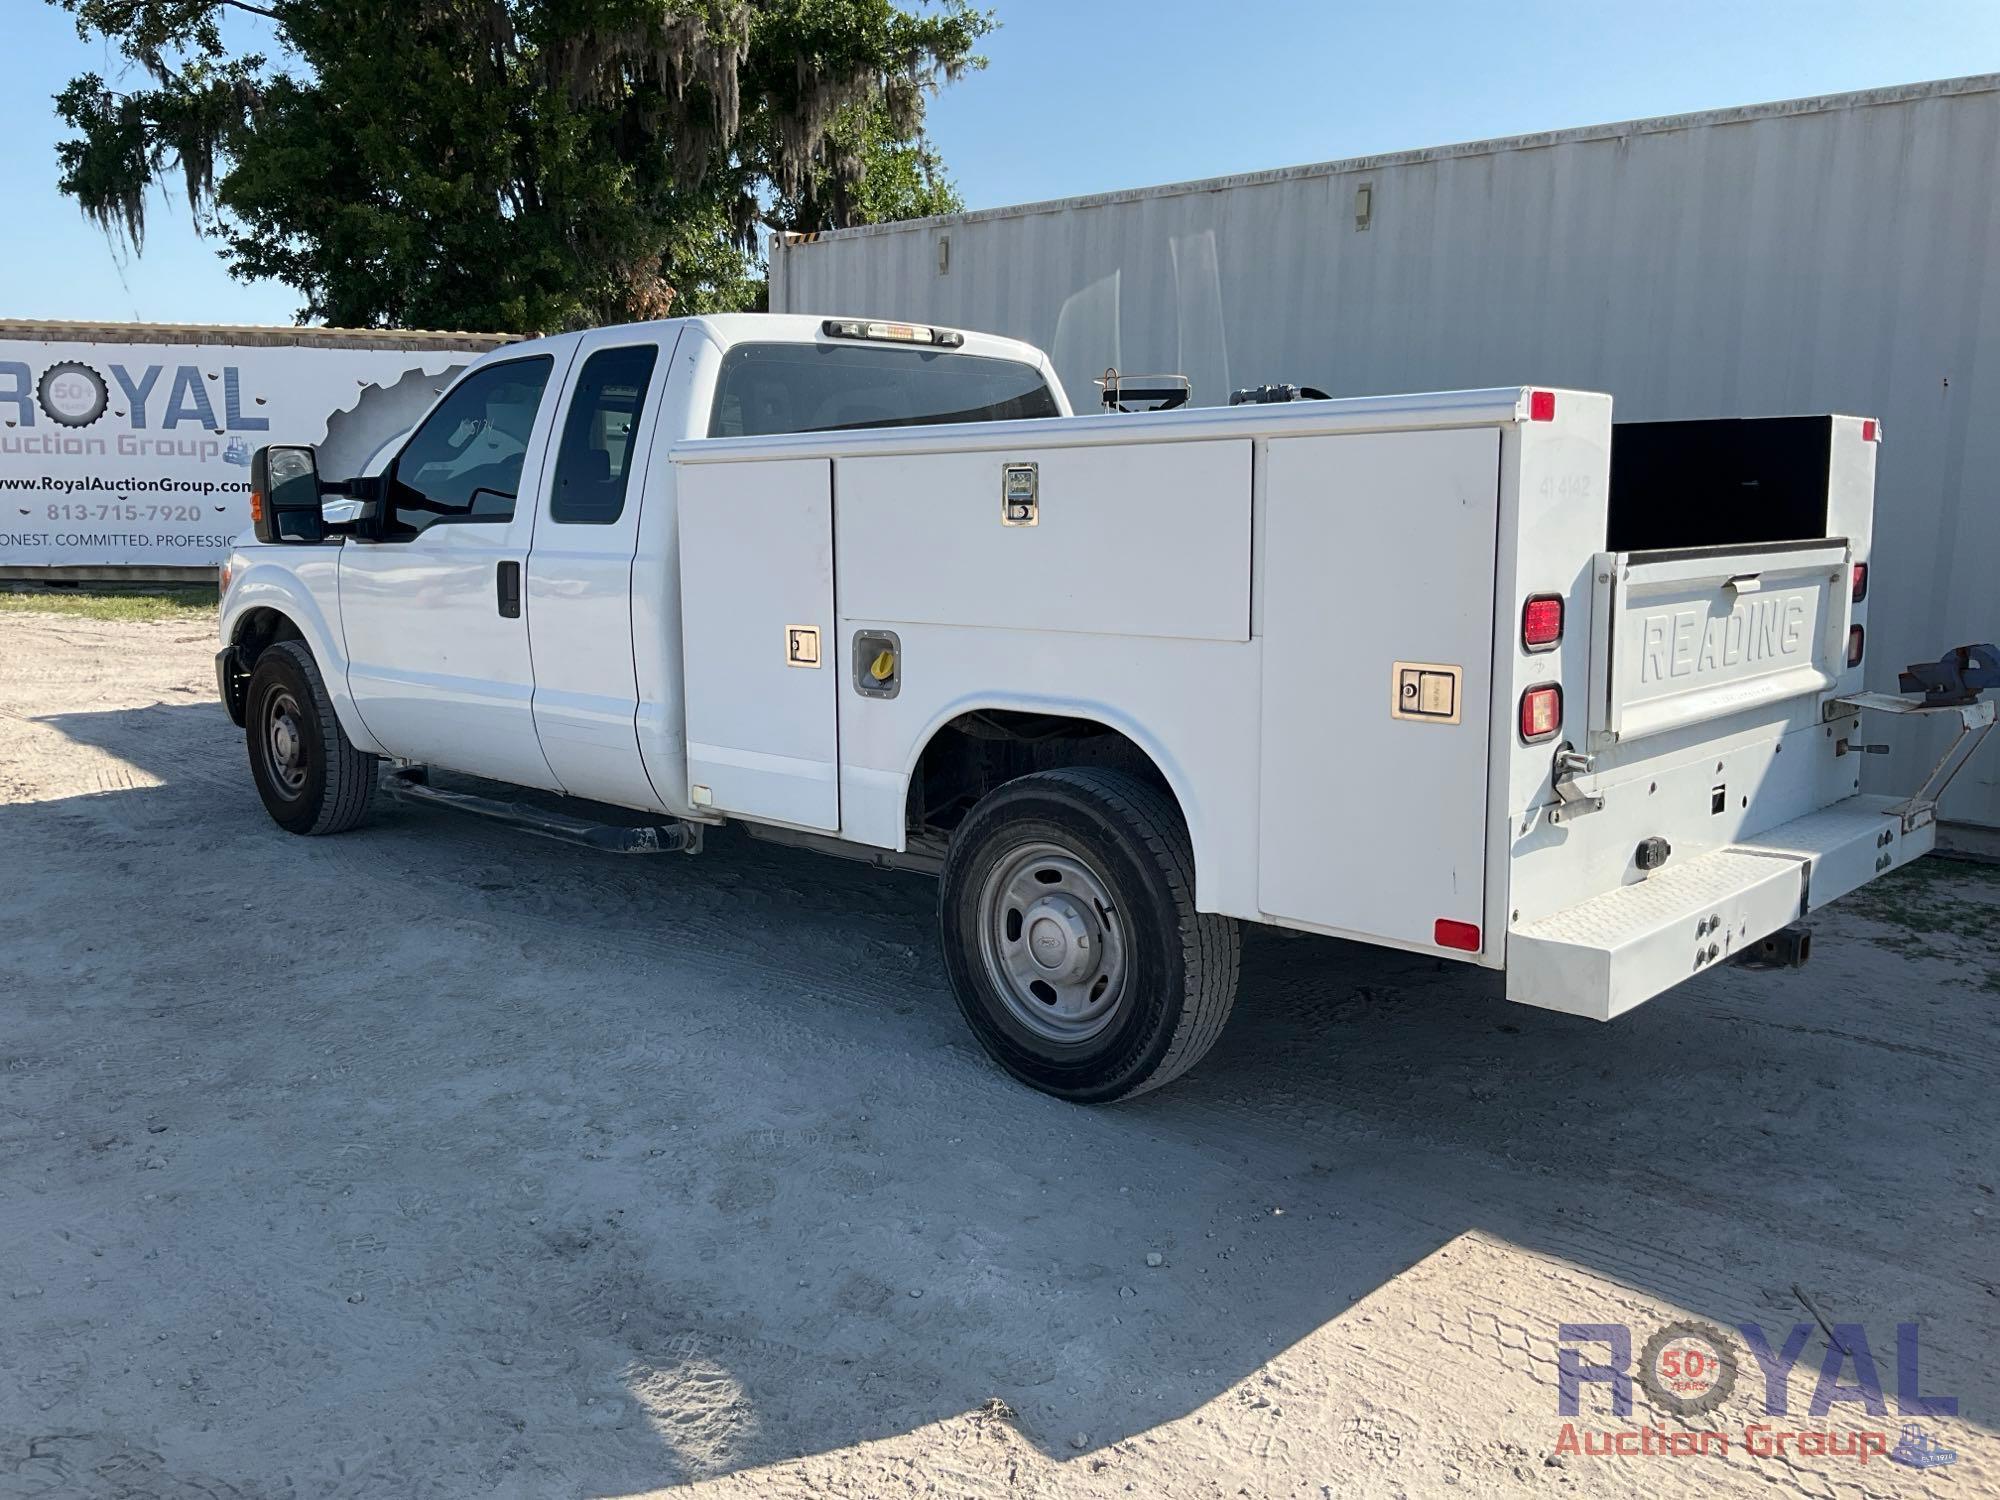 2016 Ford F250 Service Truck